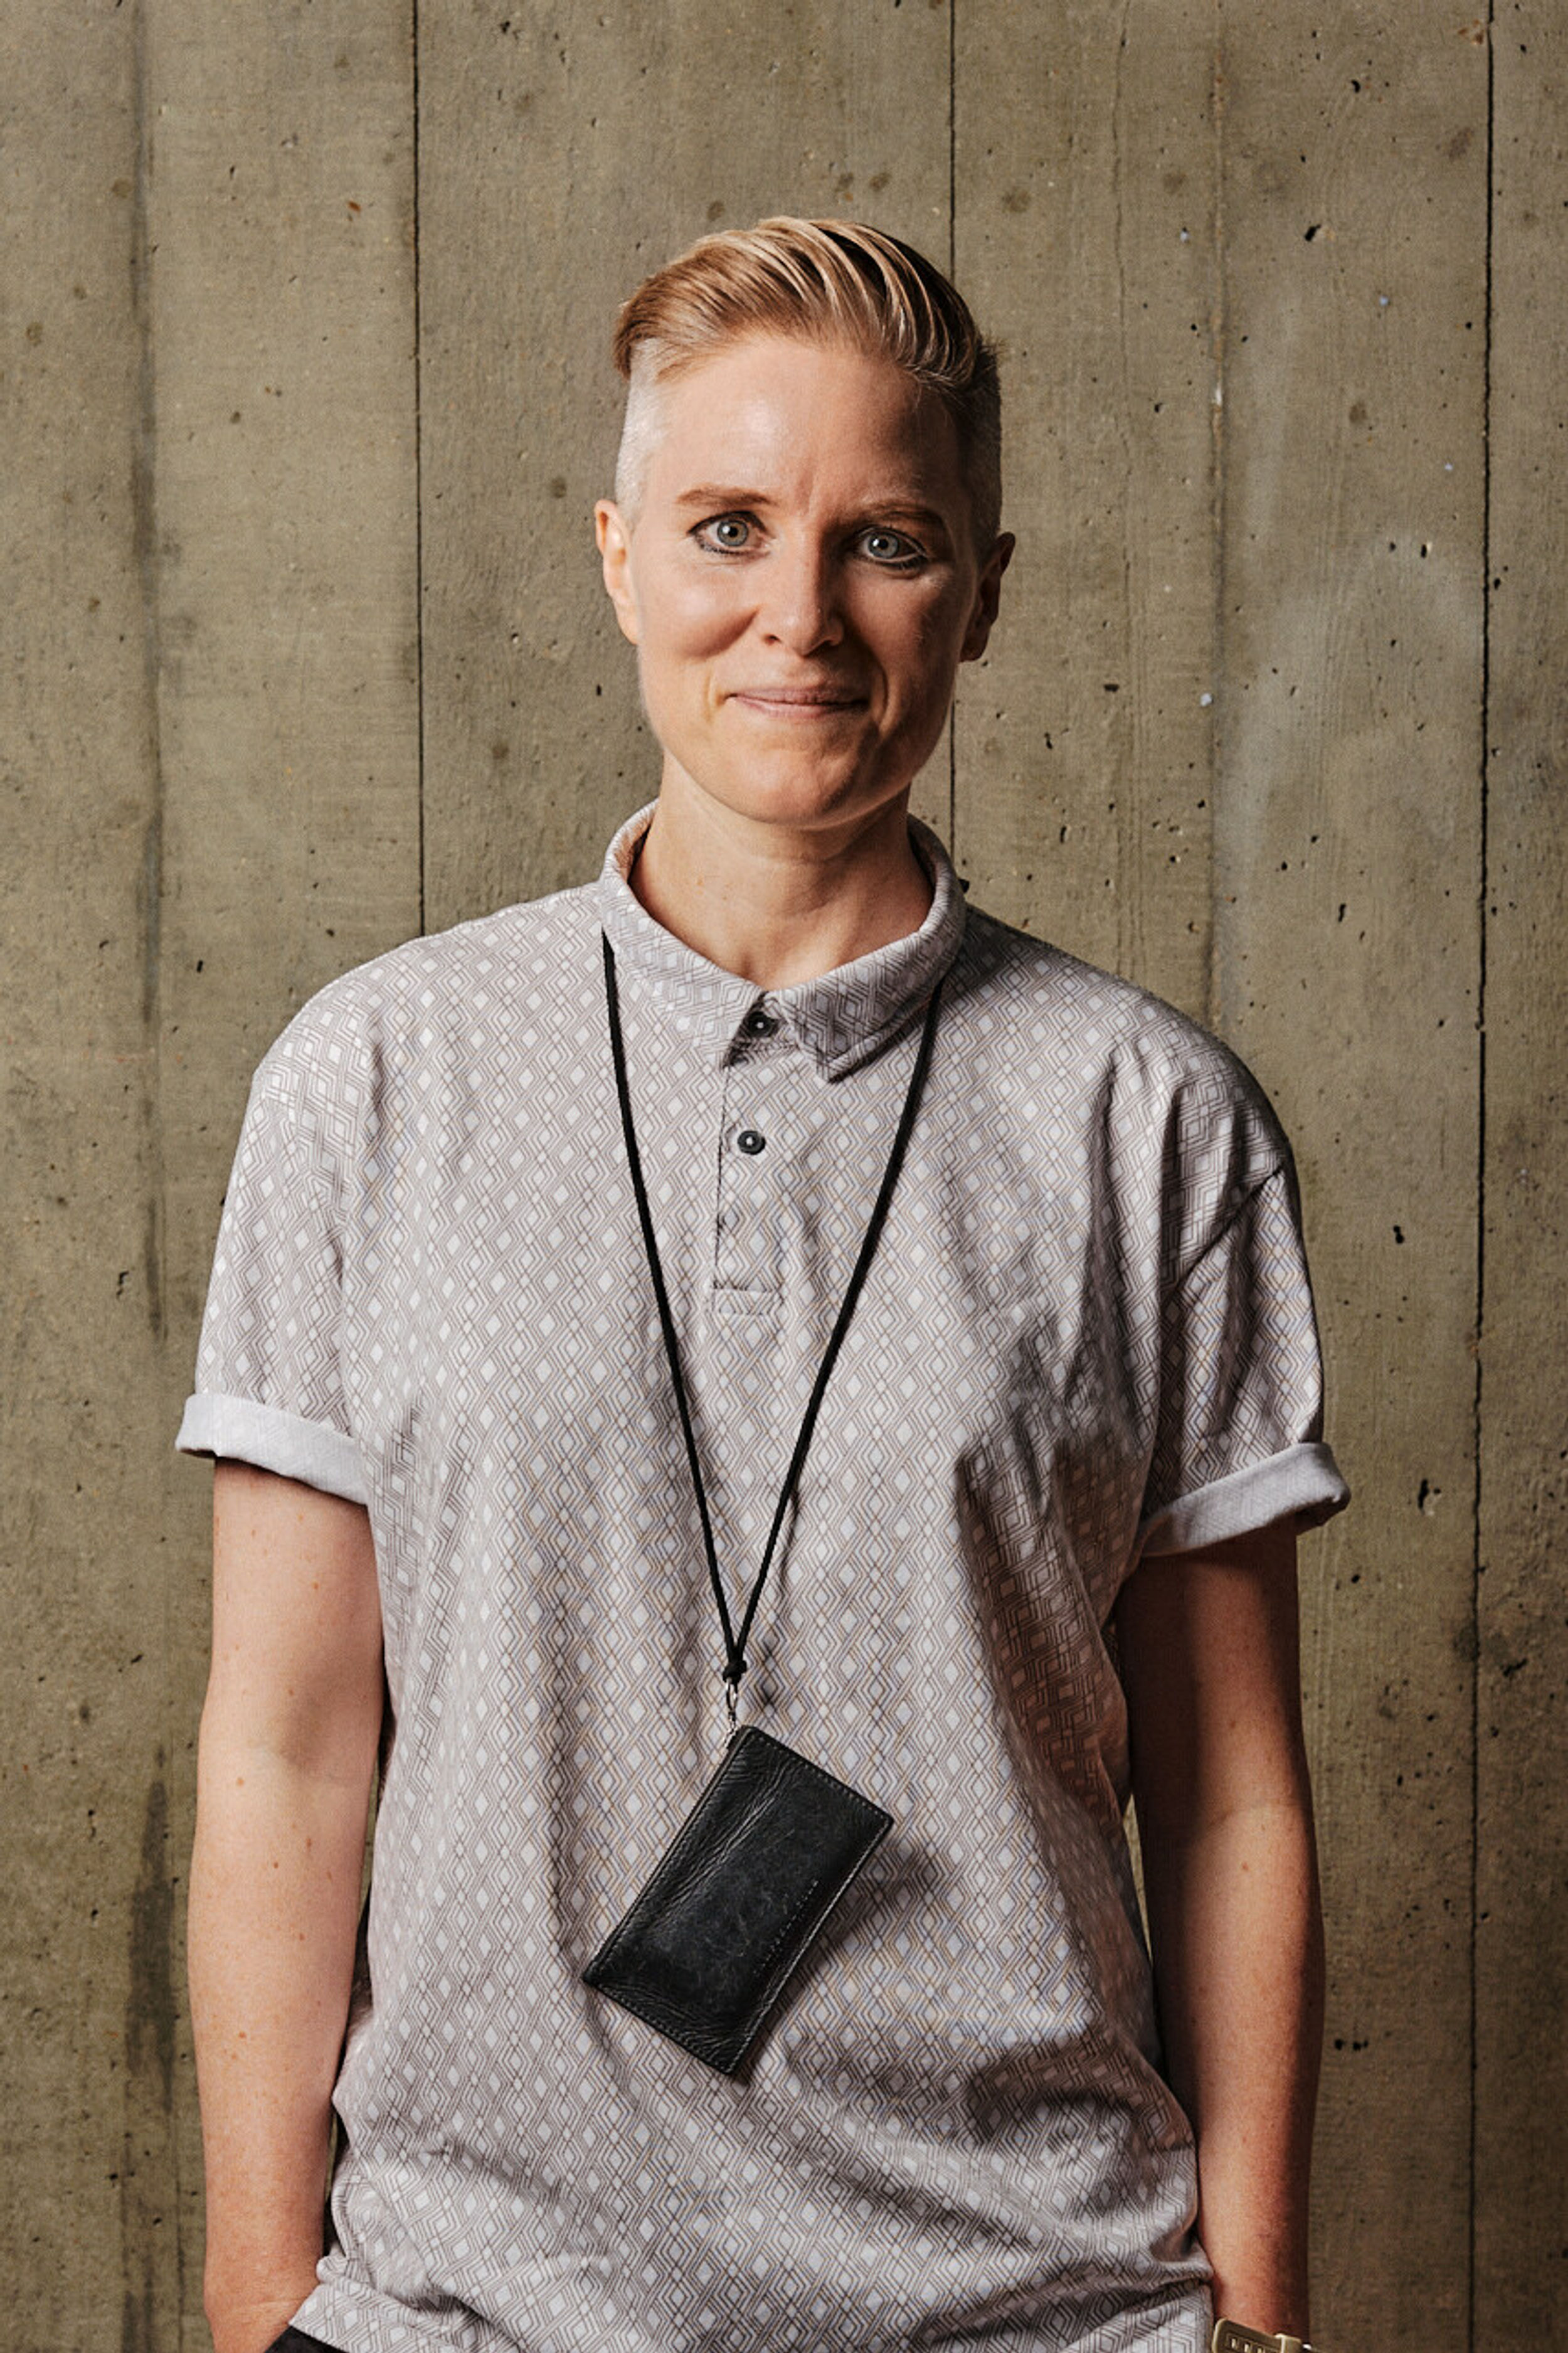 A profile shot of a person smiling with short blonde hair, wearing a patterned, short sleeved shirt and black wallet around their neck, in front of a board marked concrete backdrop.